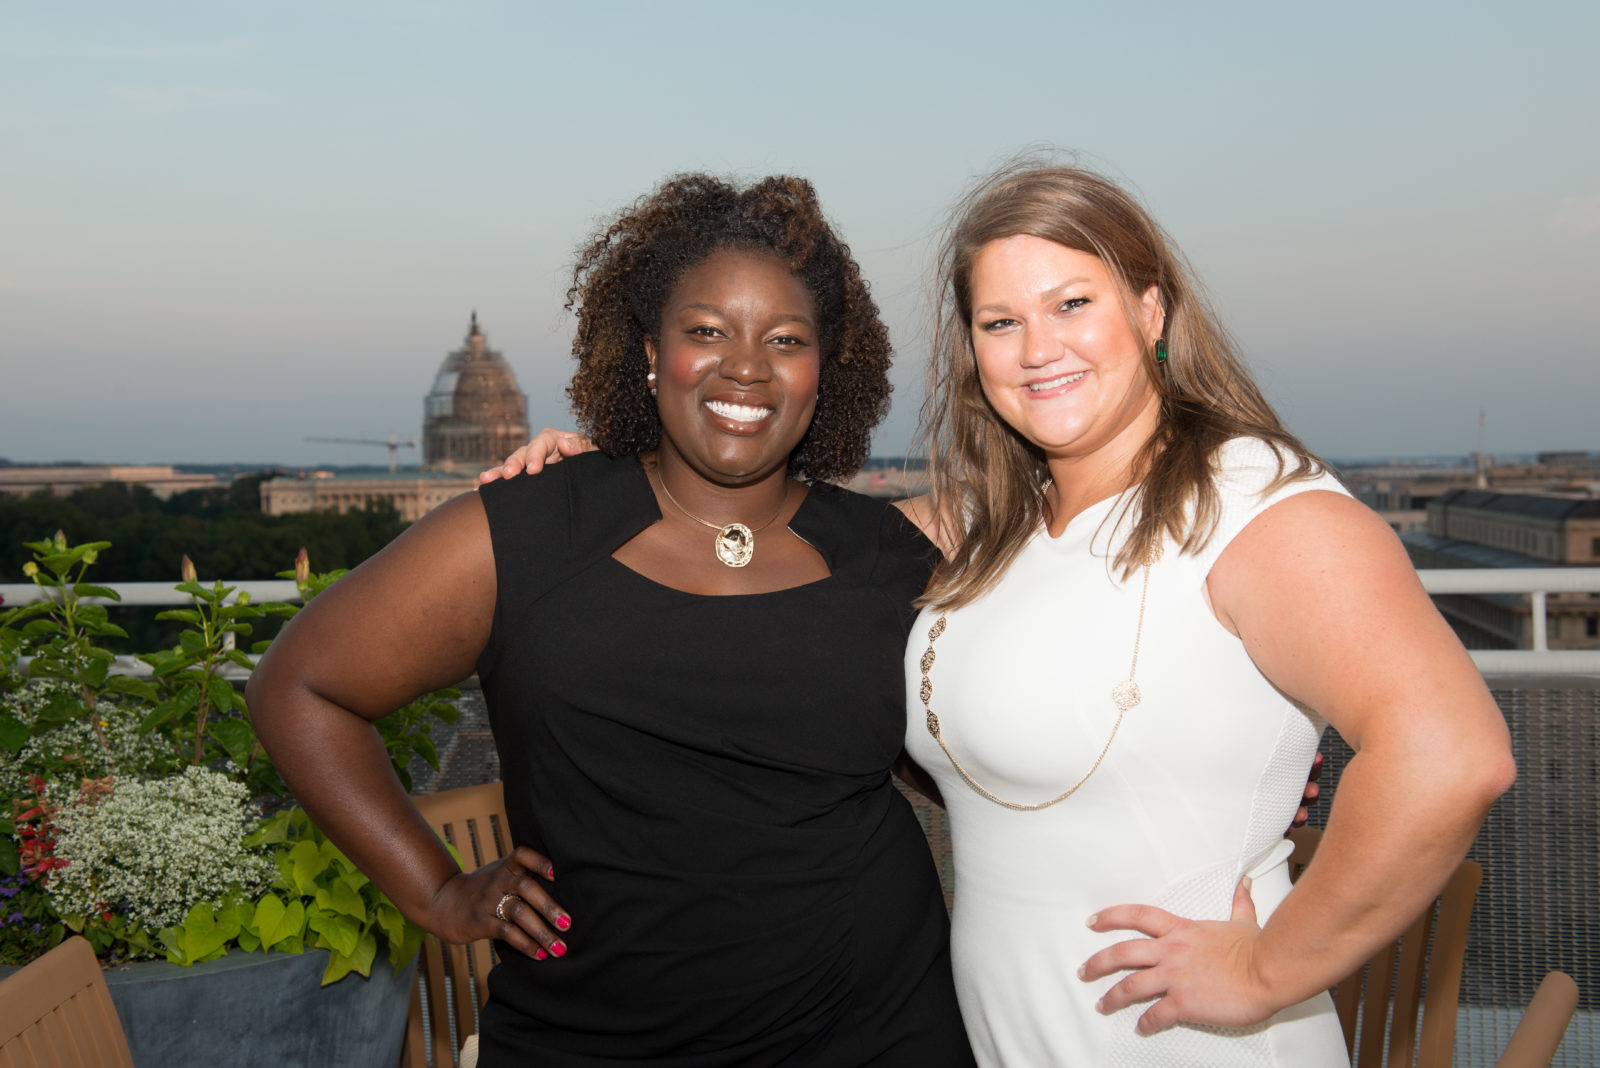 New LSI graduates Akua Amaning (LSI 15) and Amanda Klopf (LSI 15) enjoy the view from their post-graduation ceremony rooftop reception.